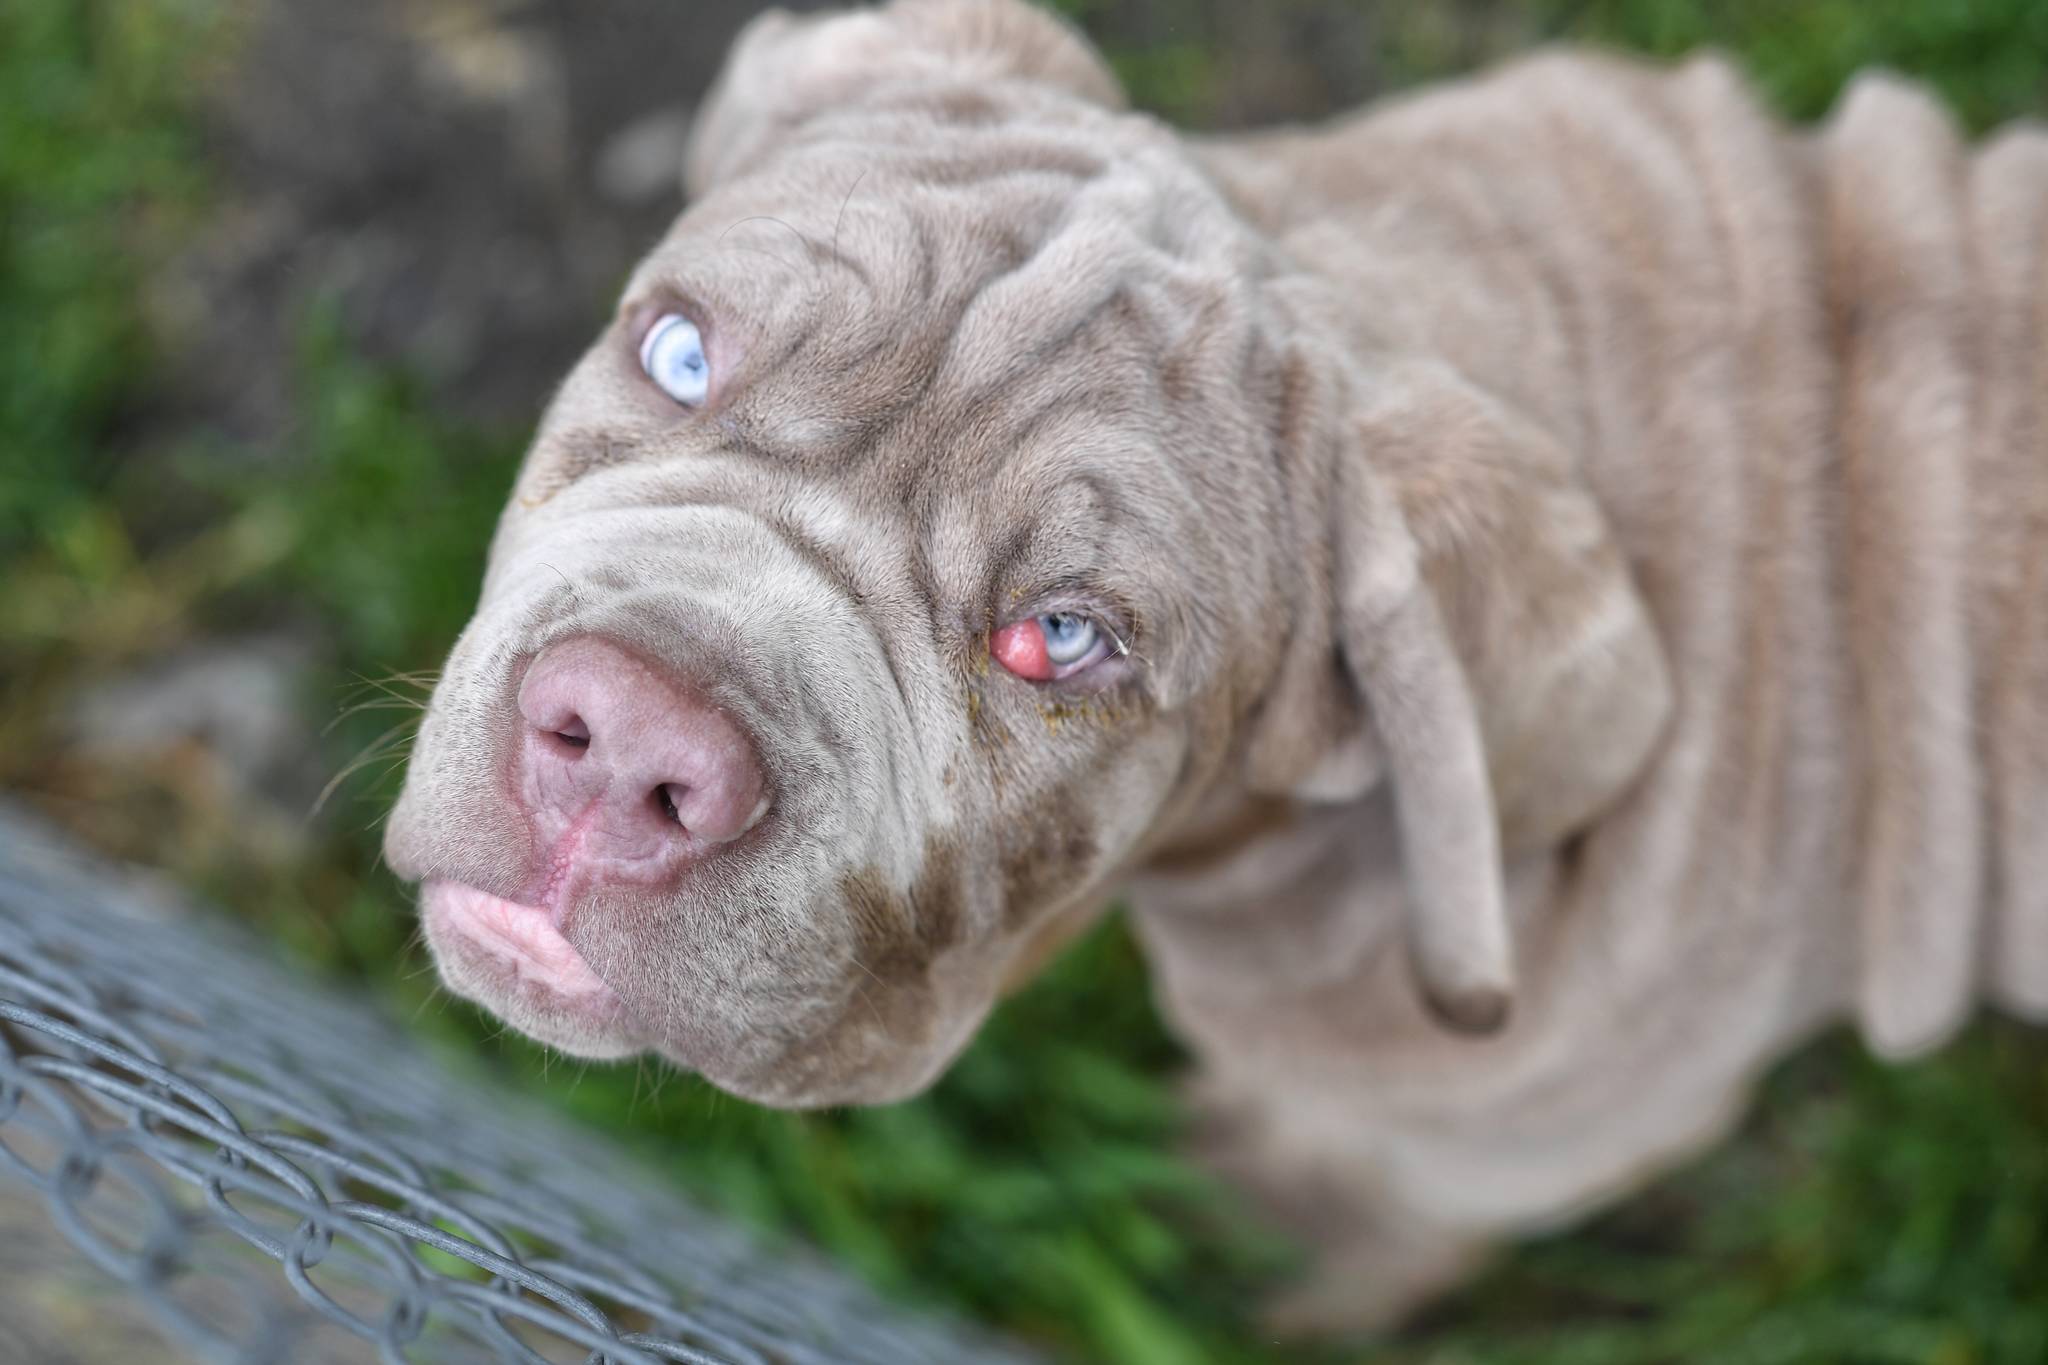 Guido, a 4-month-old Neapolitan Mastiff puppy, is pictured in front of his Ninth Street home on Tuesday. (Michael Penn | Juneau Empire)